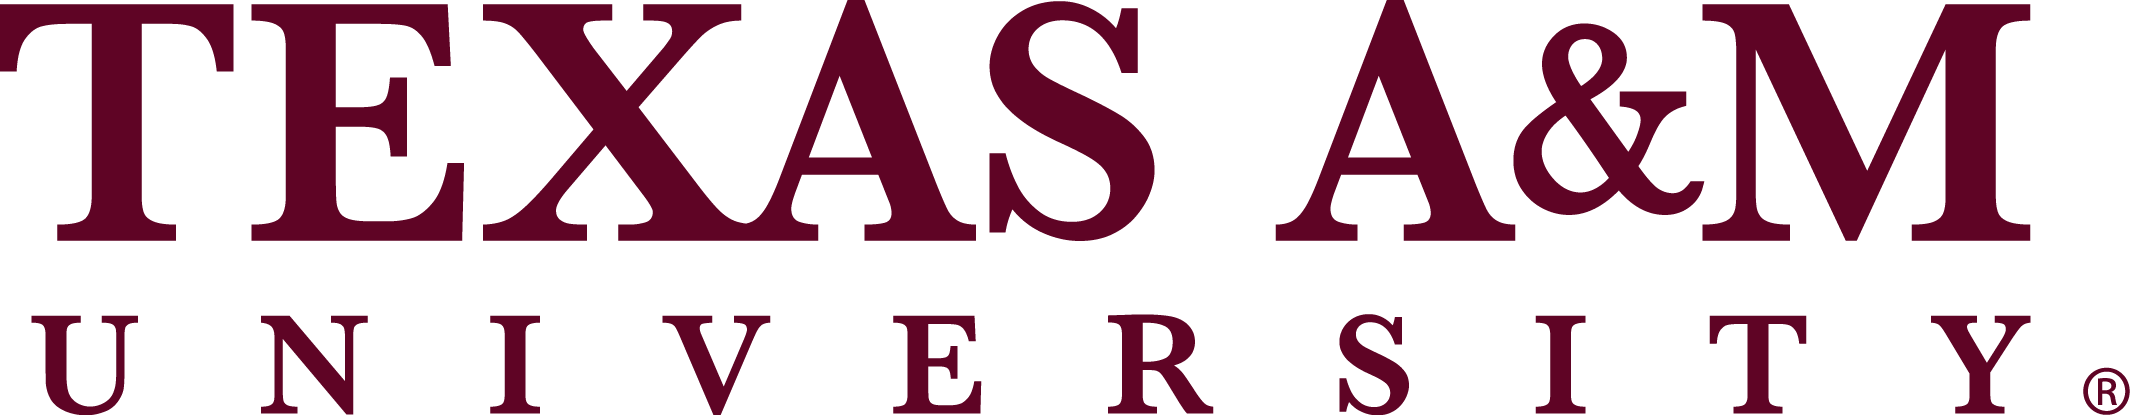 ACES Fellows Program at Texas A&M University | Institute for Resources,  Environment and Sustainability